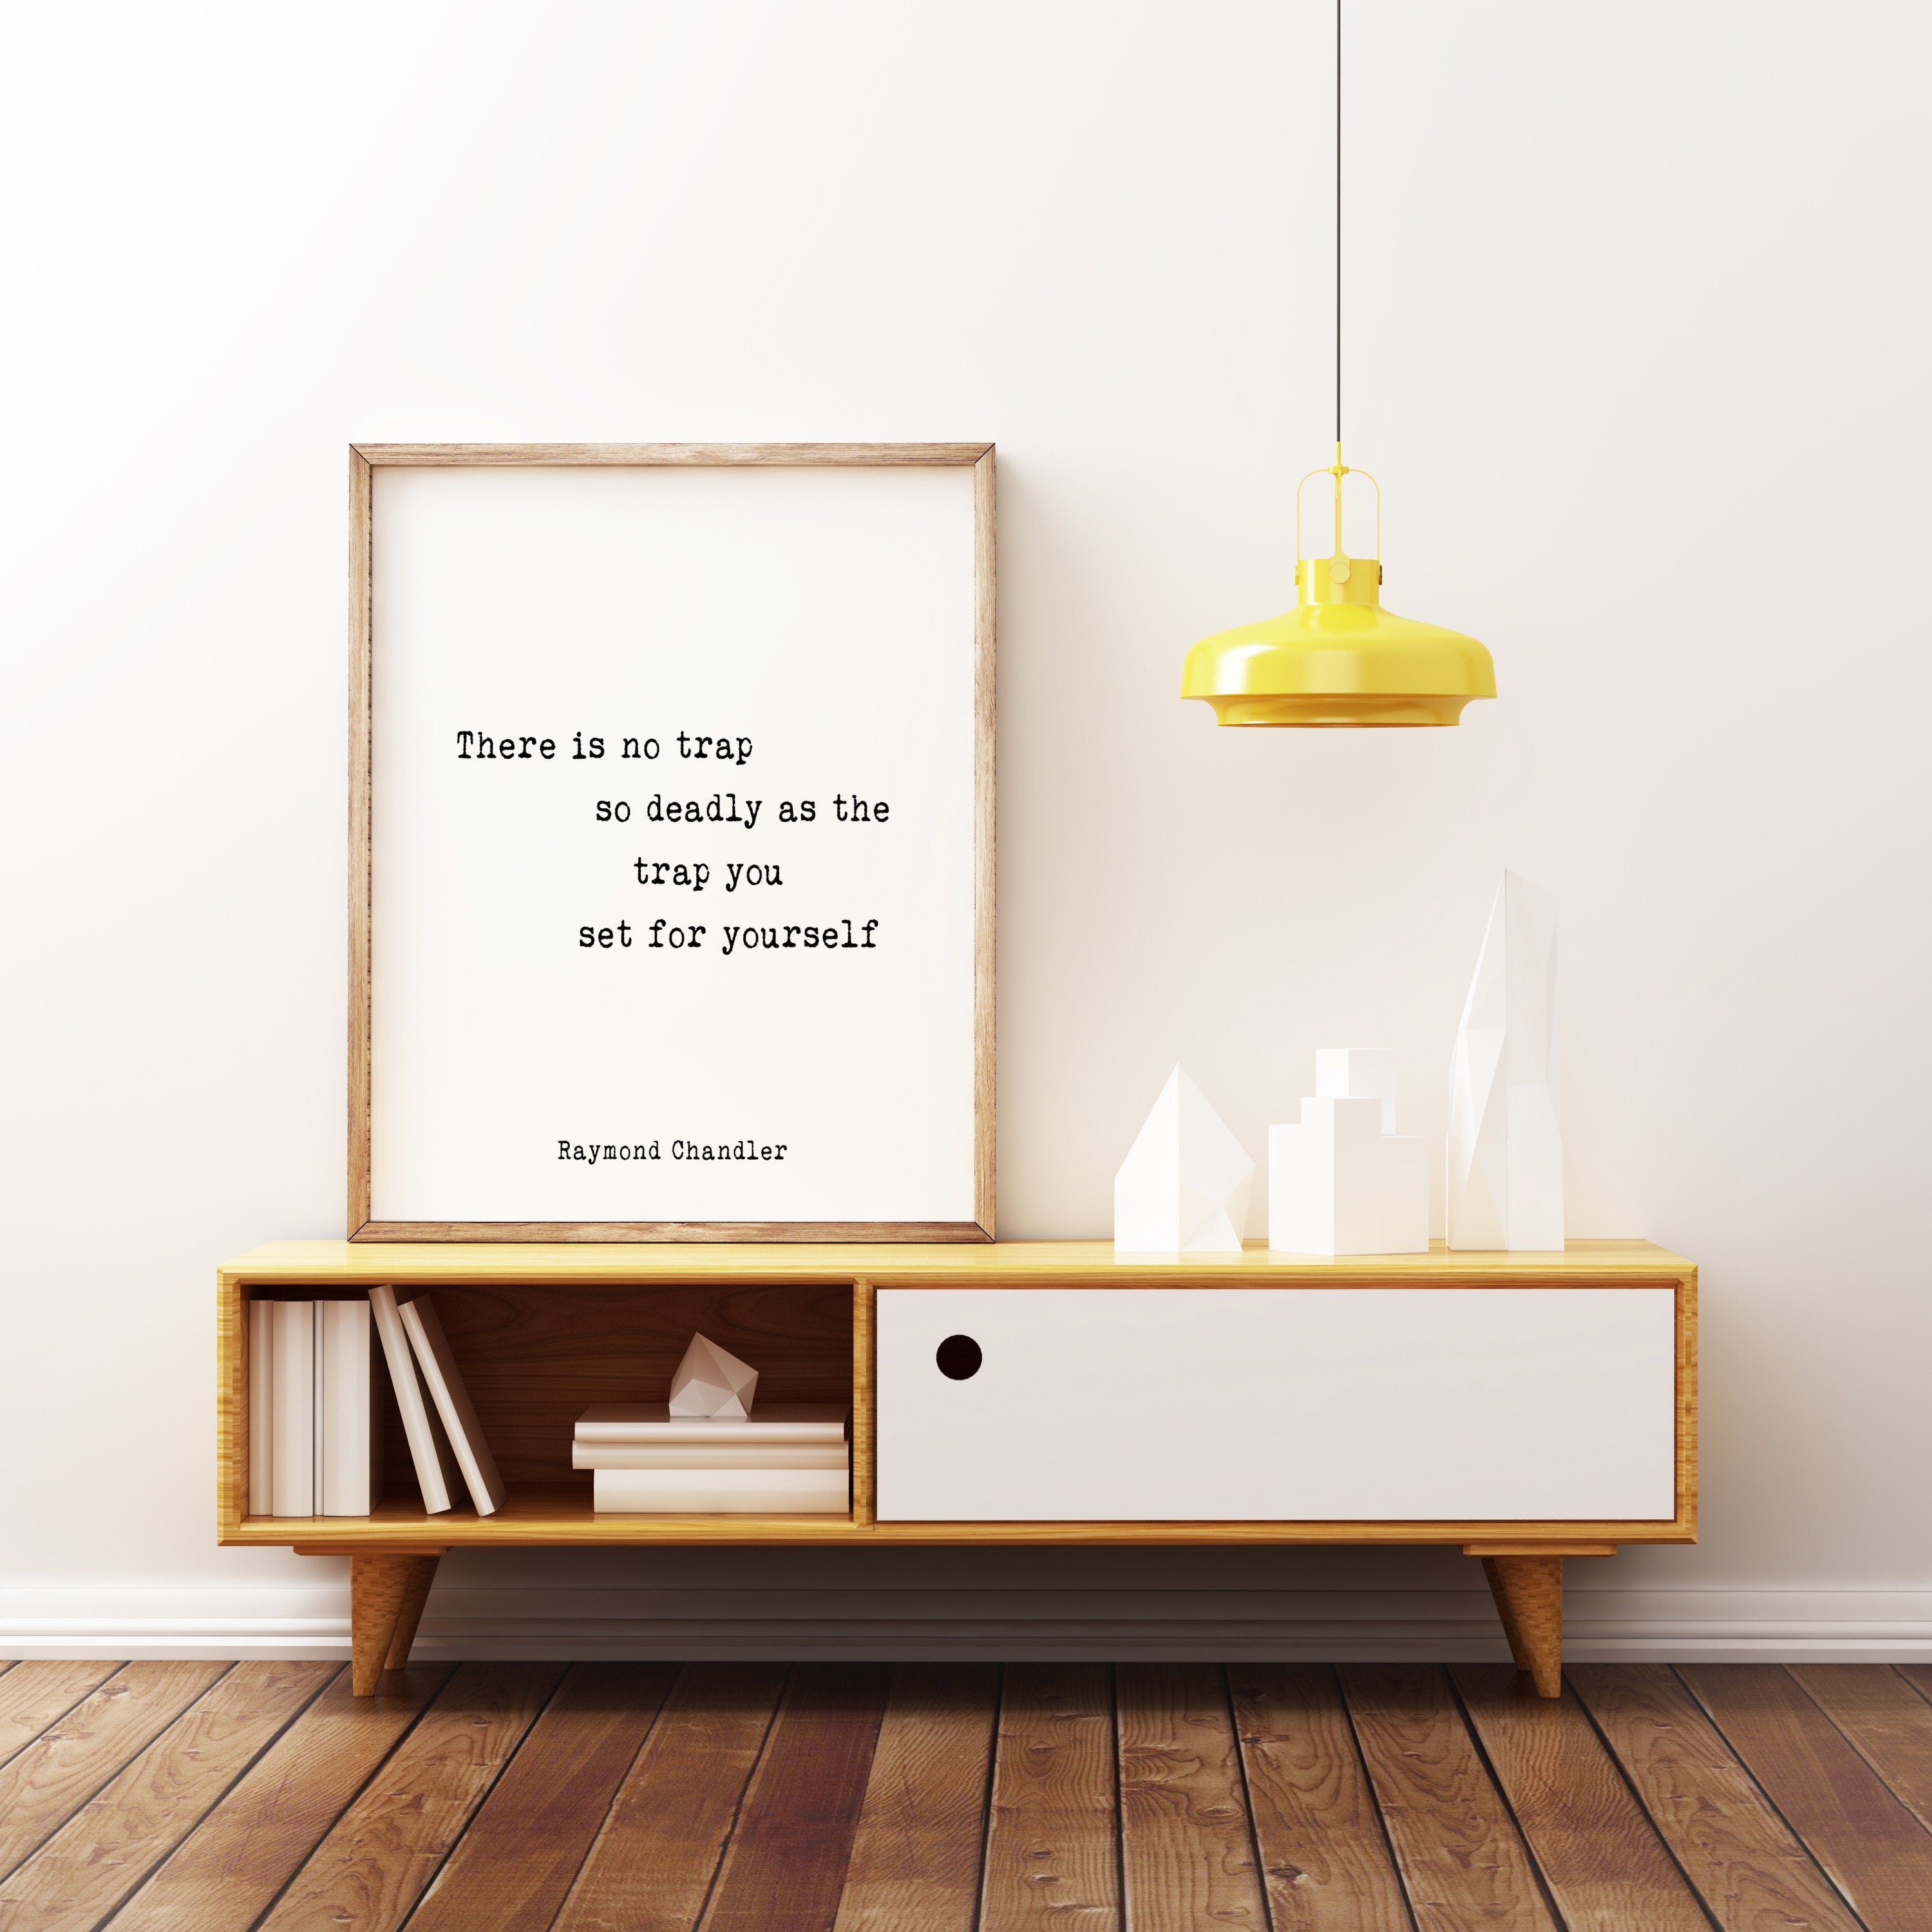 Raymond Chandler quote print, There is no trap so deadly